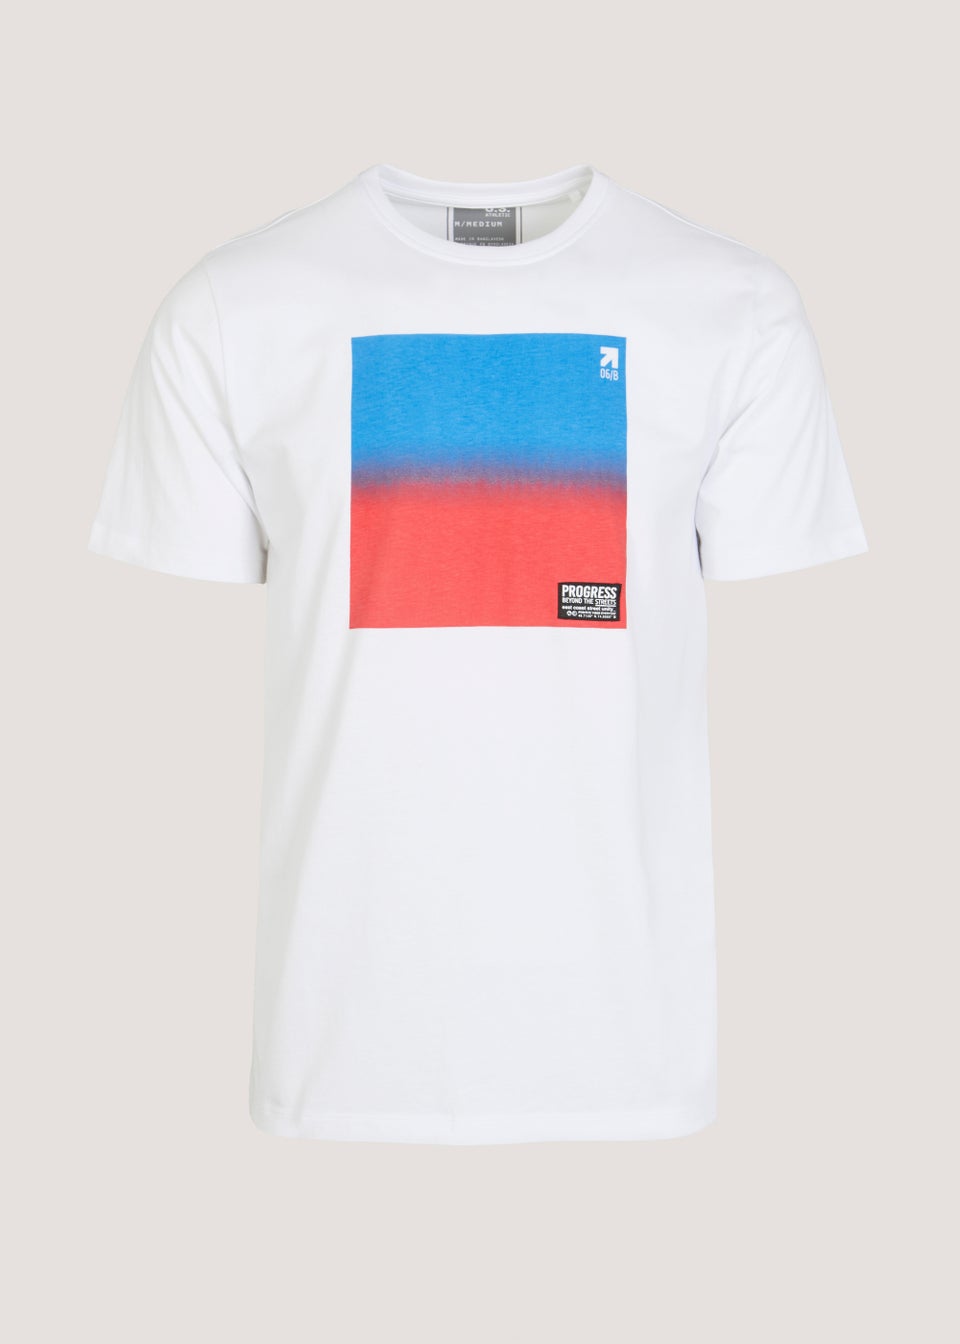 US Athletic White Ombre Print T-Shirt